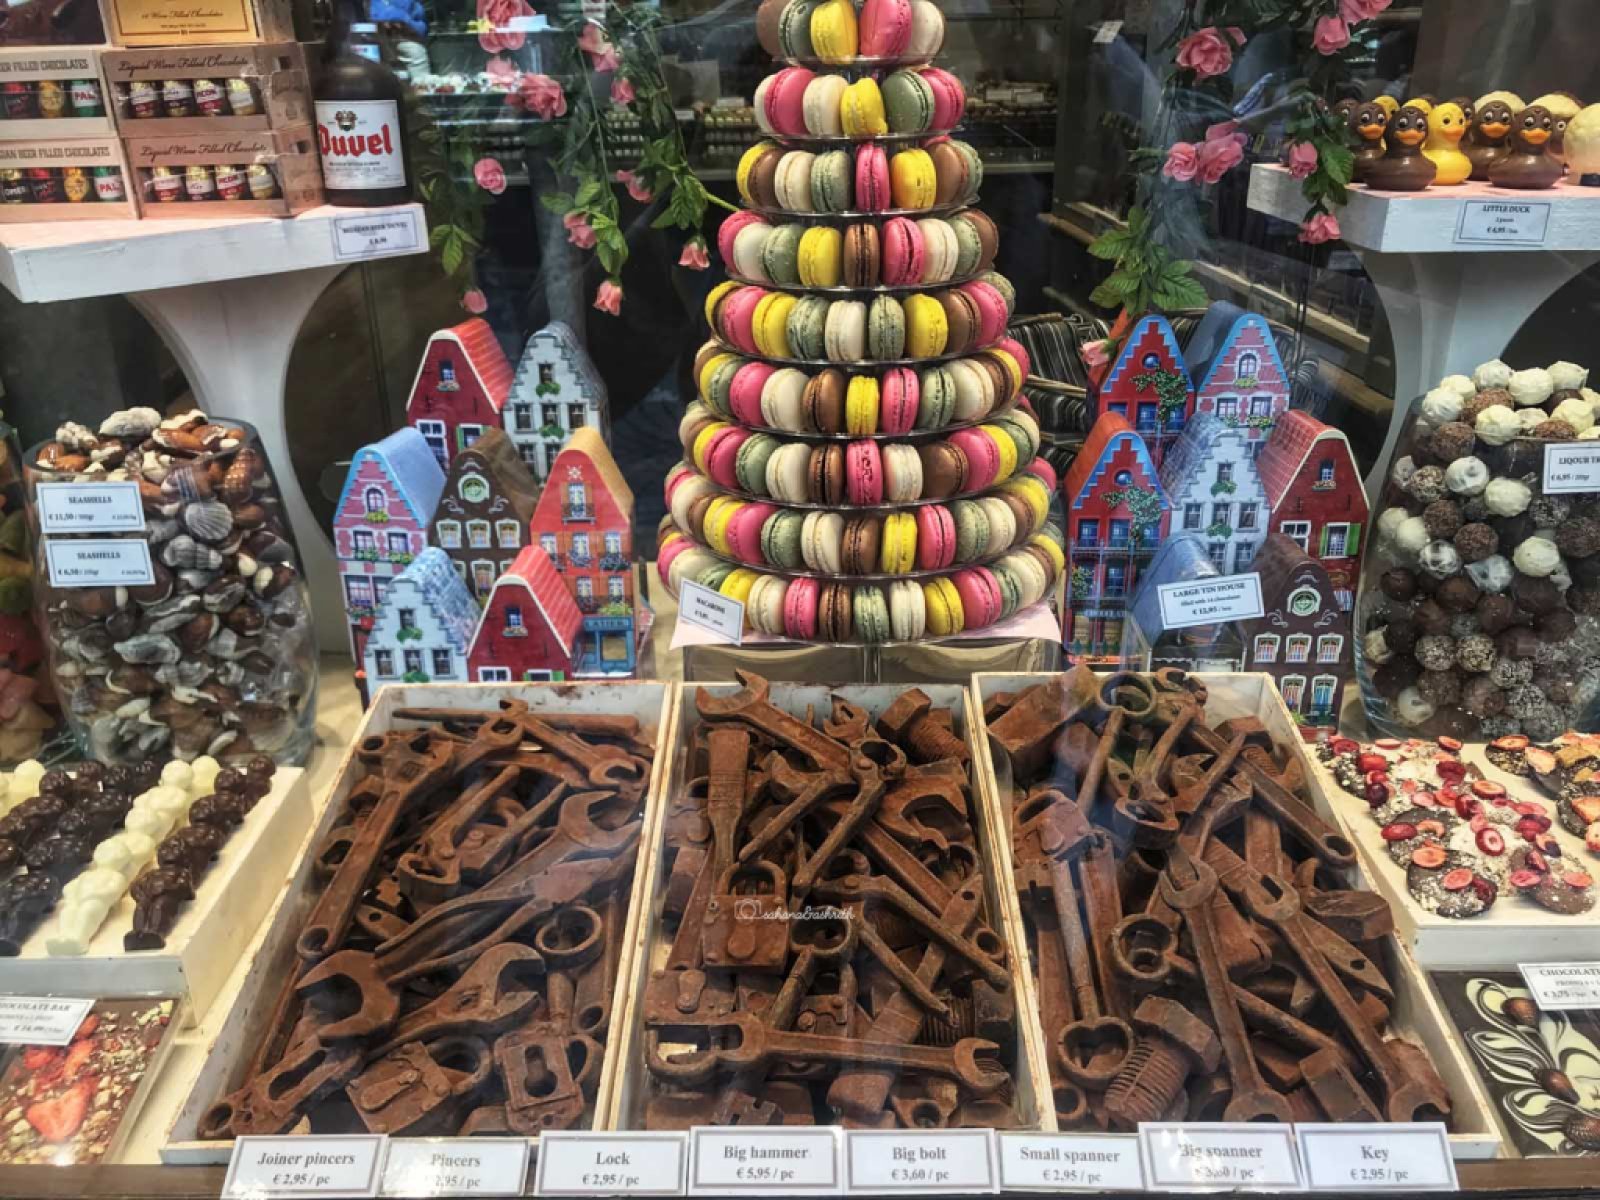 Belgian Chocolates shaped like spanners, bolts and other mechanic items and a tower of Macarons in Brussels